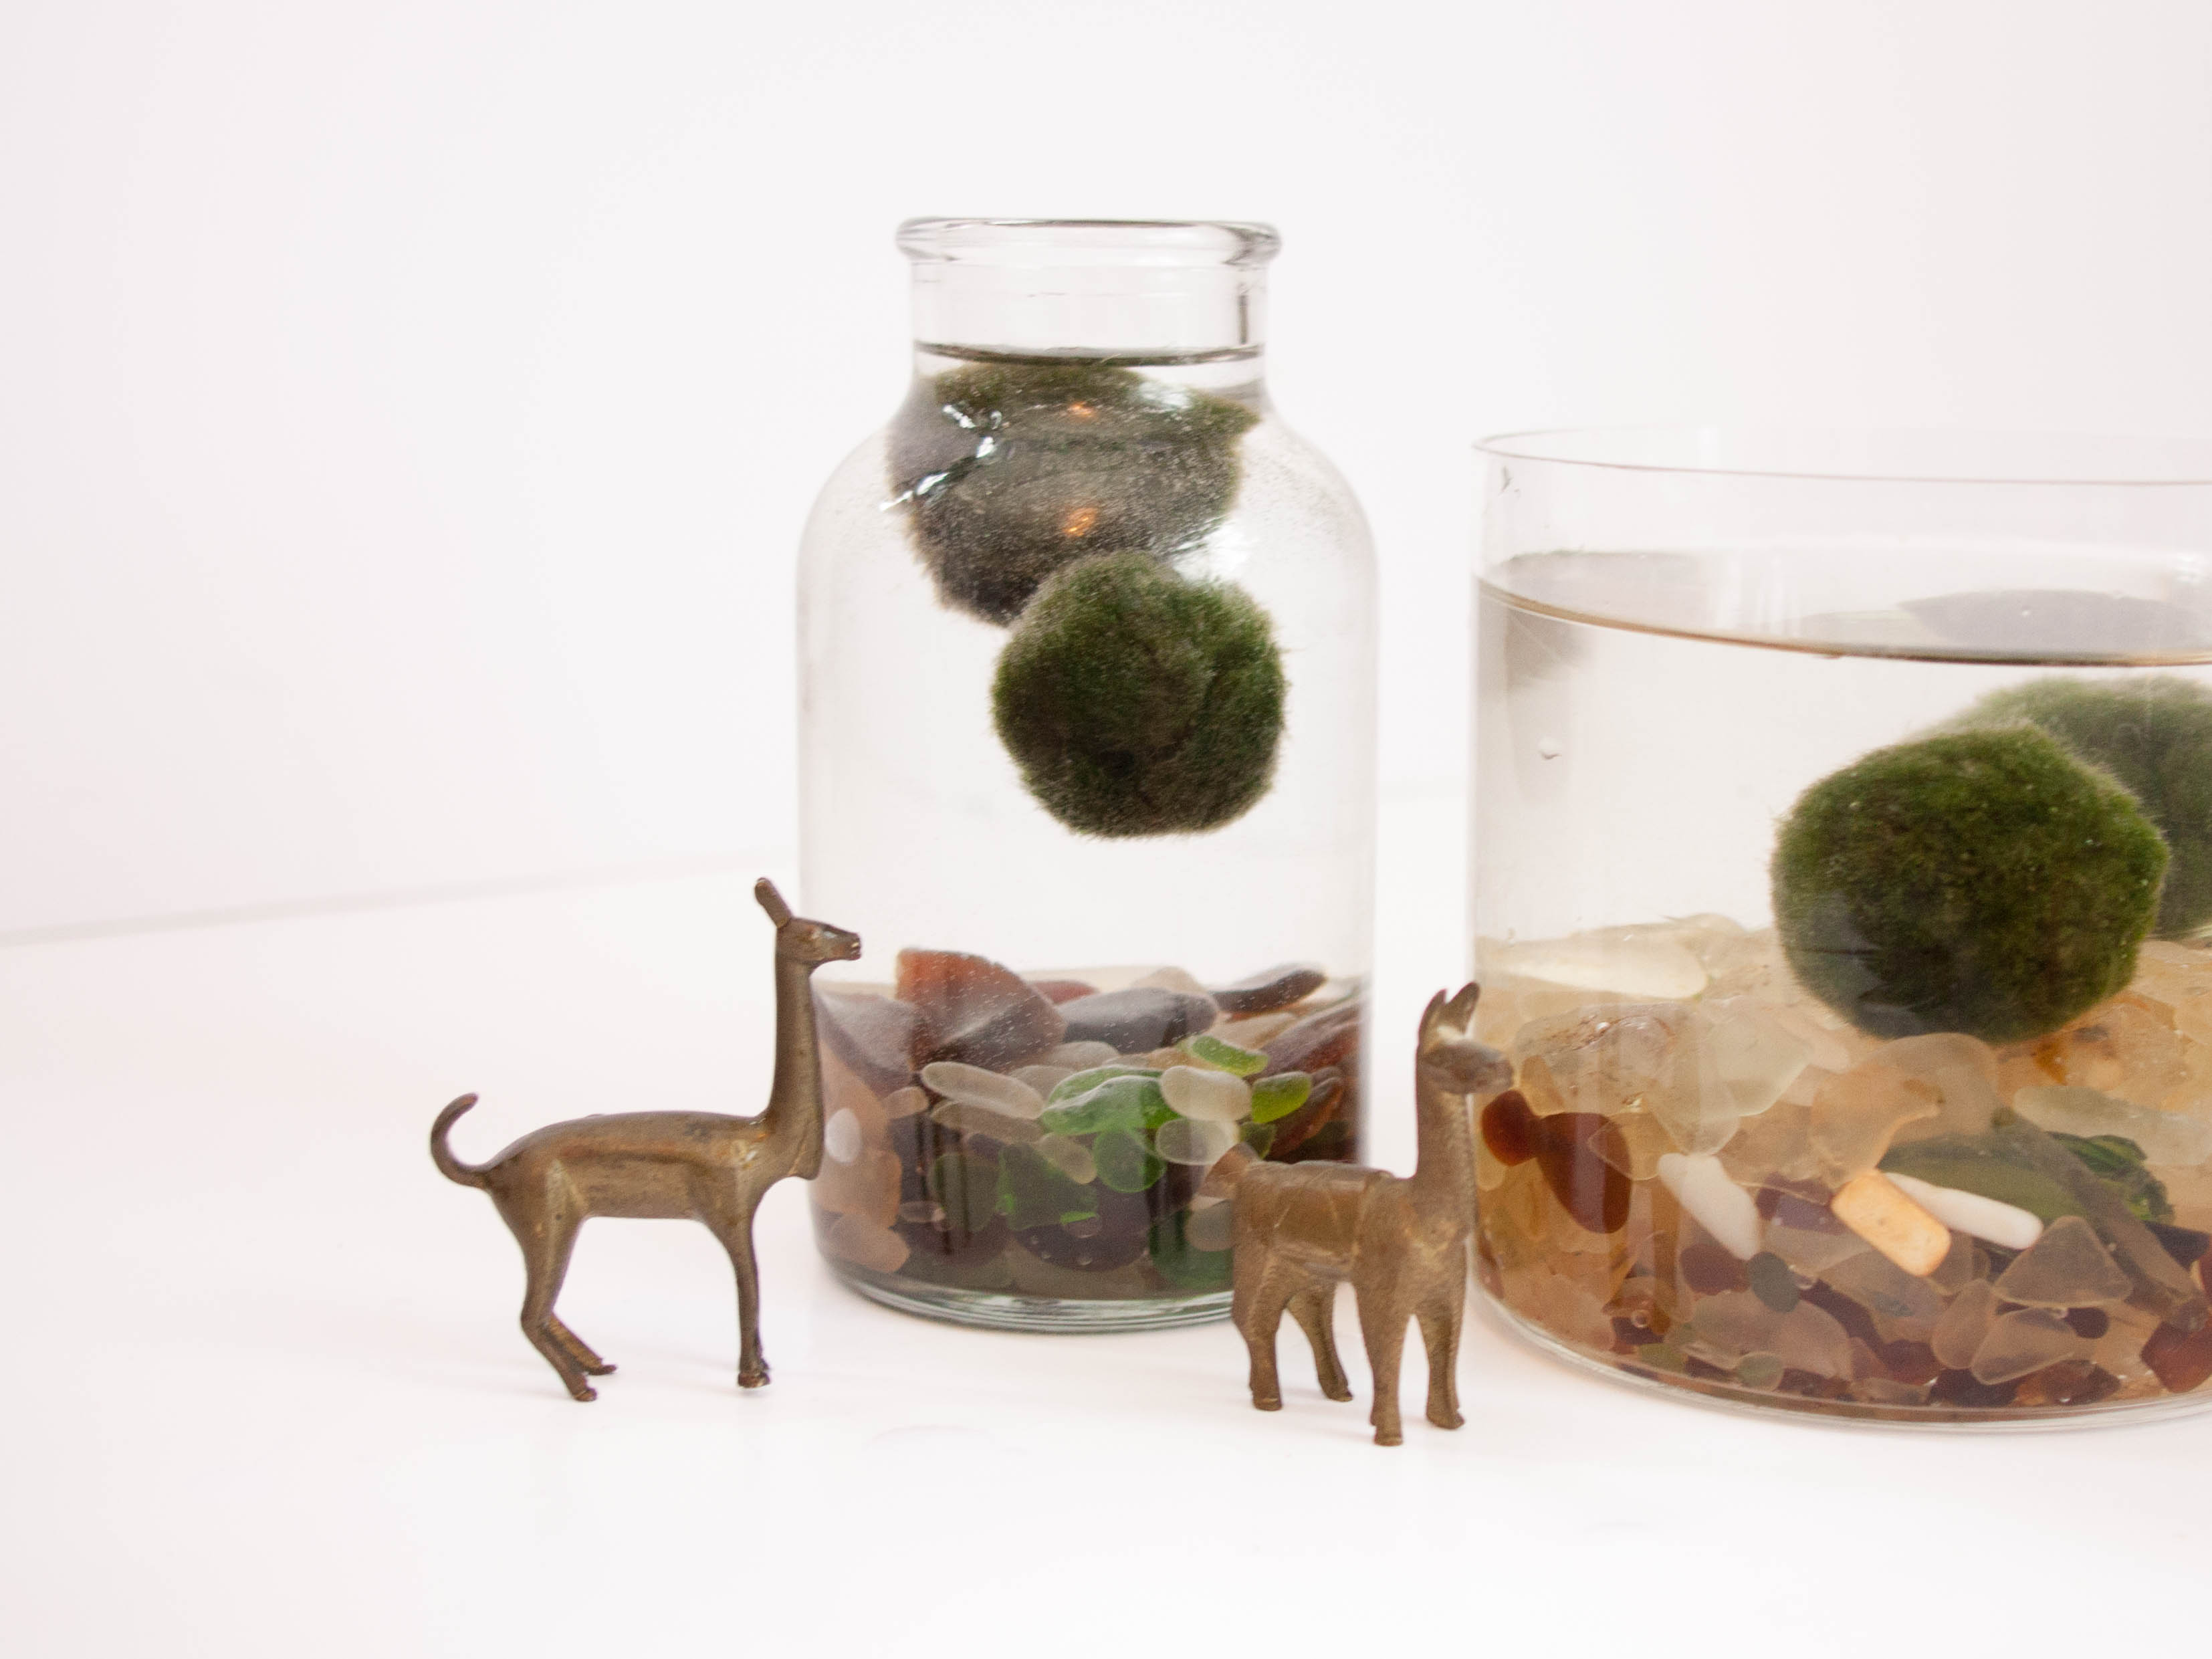 Learning about and Experiments with Torasampe - Aegagropila linnaei - also called Marimo Japanese moss balls by rochellegreayer www.pithandvigor.com